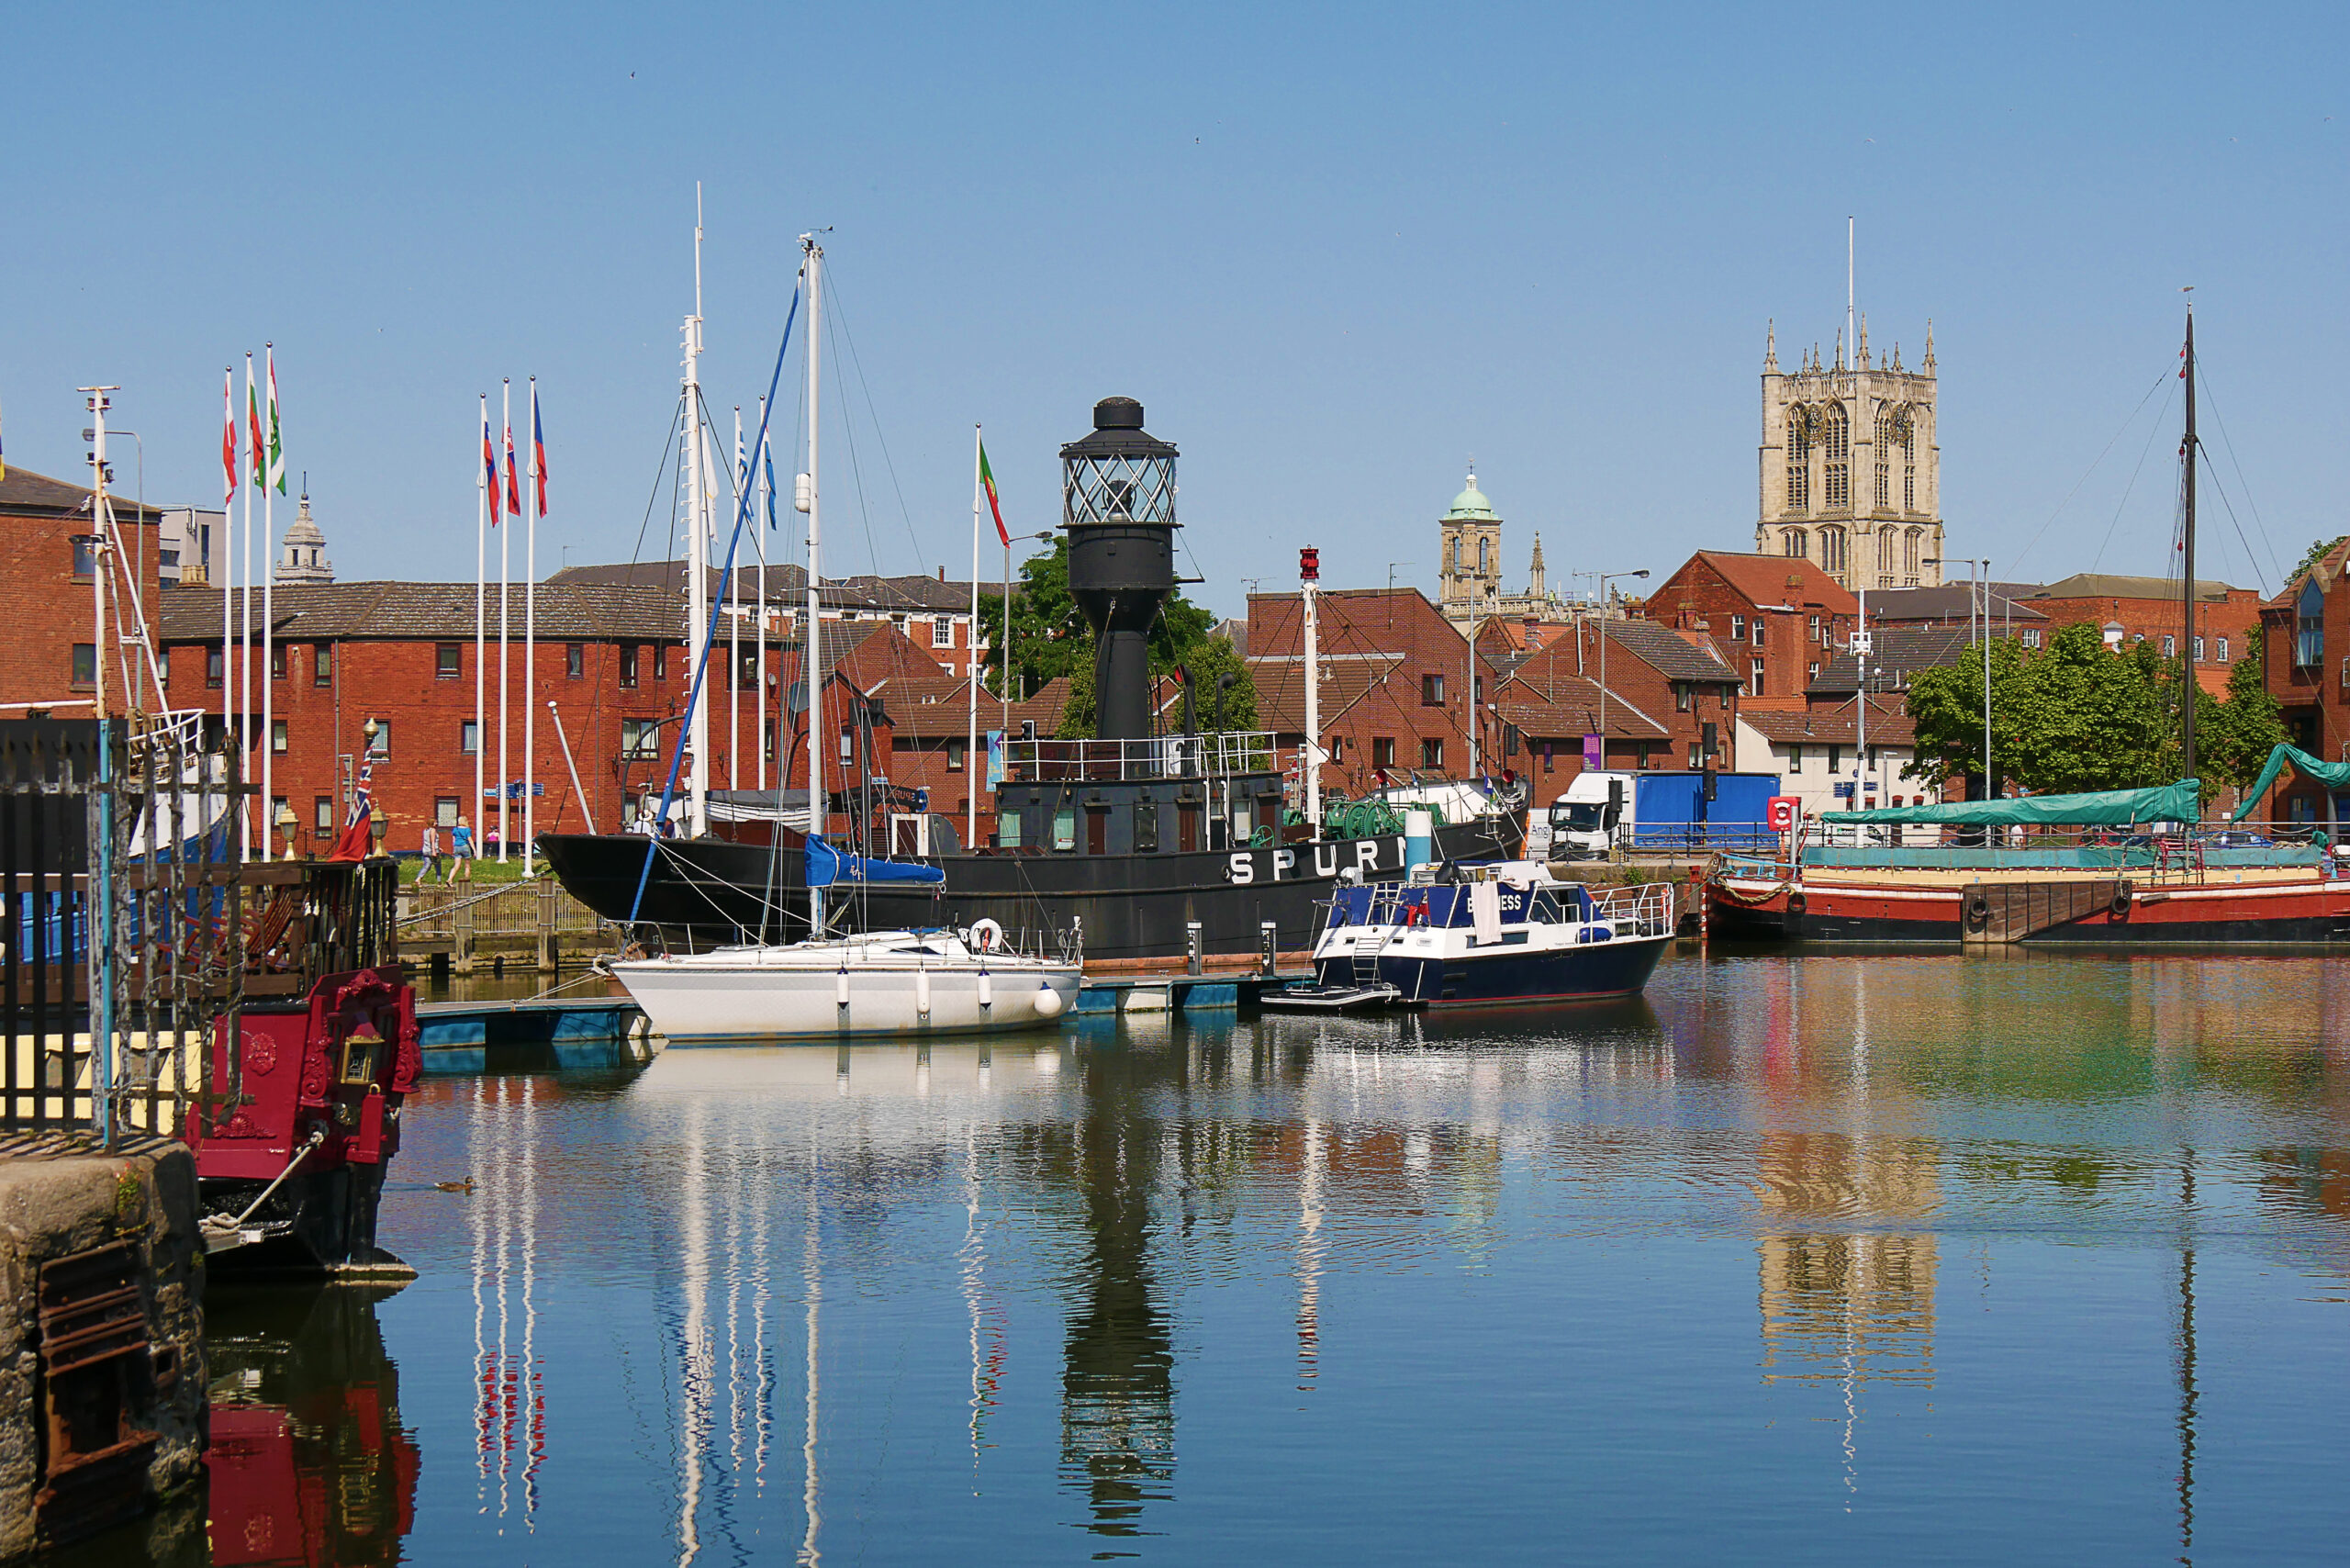 View of the old Spurn Lightship moored in marina. Kingston upon Hull, Humberside.